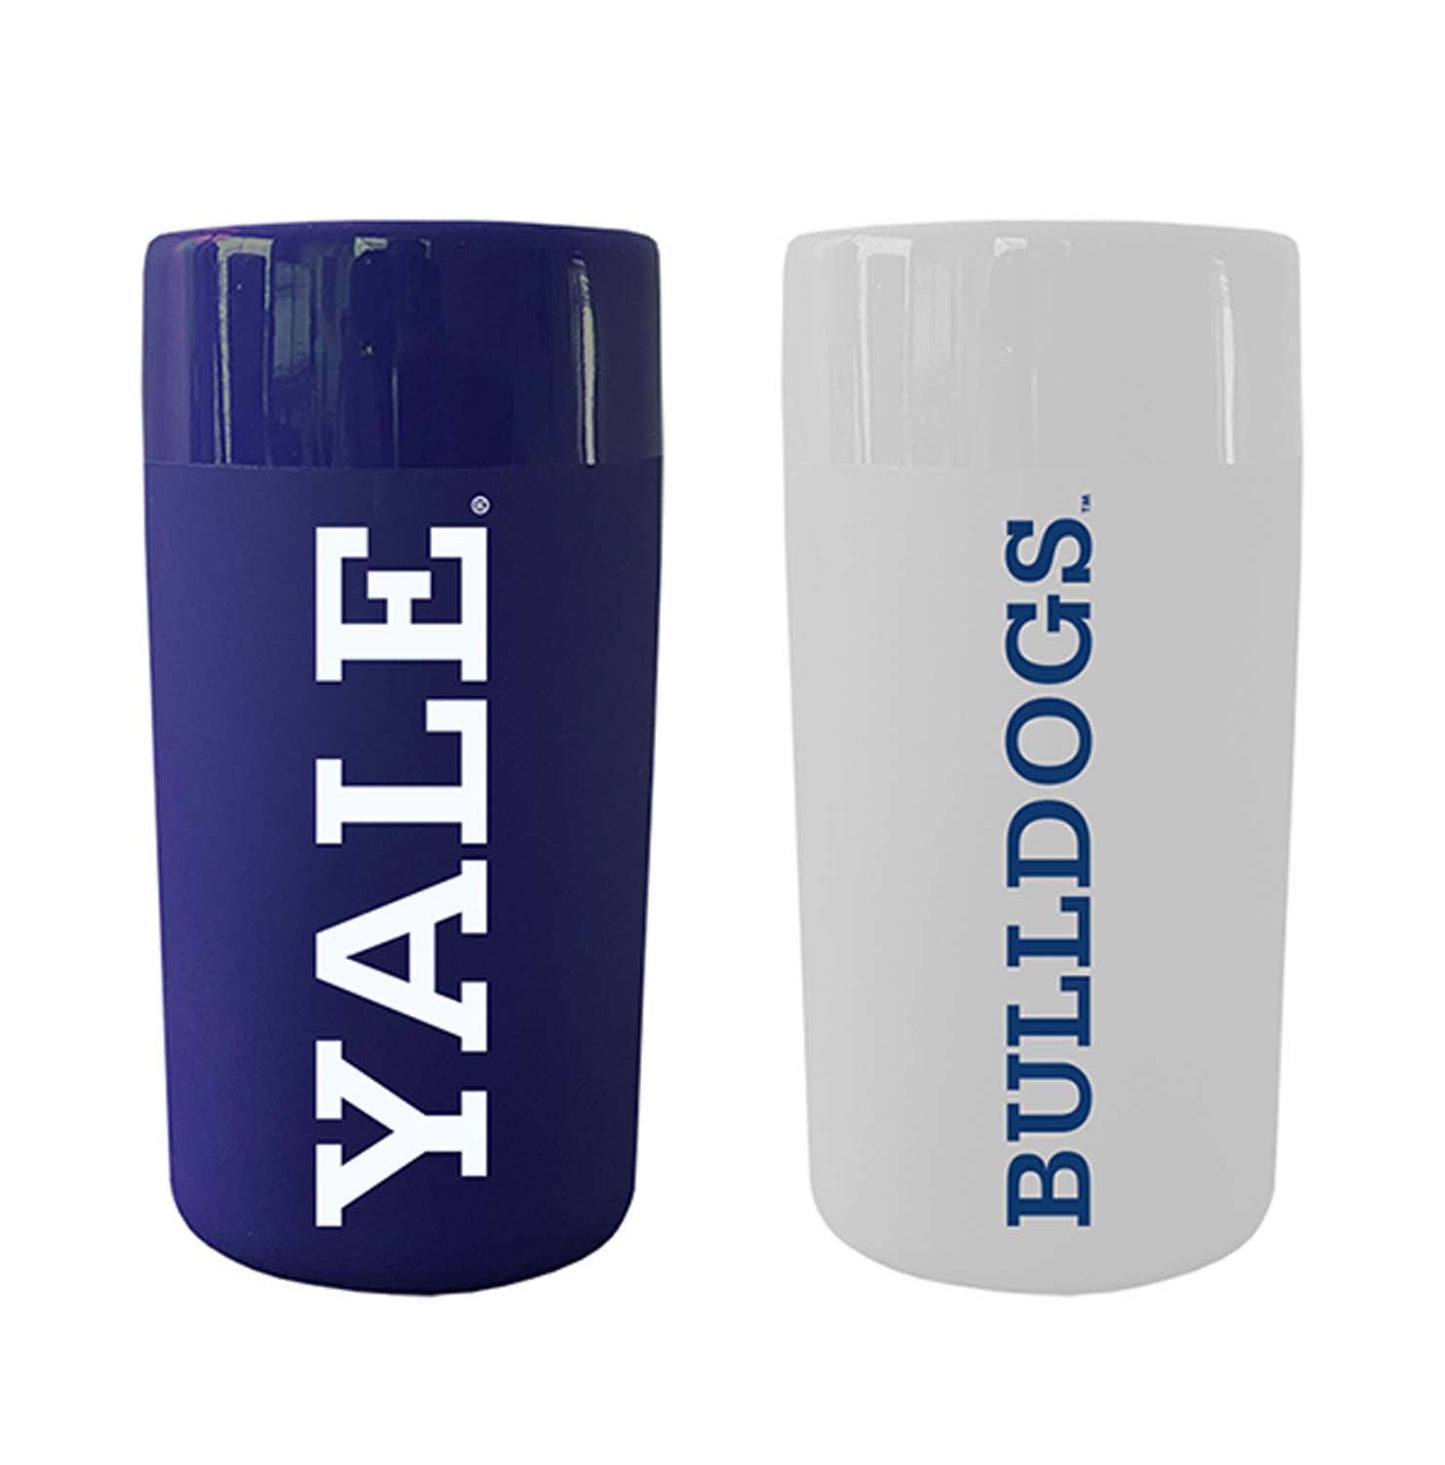 Yale Bulldogs College and University 2-Pack Shot Glasses - Team Color